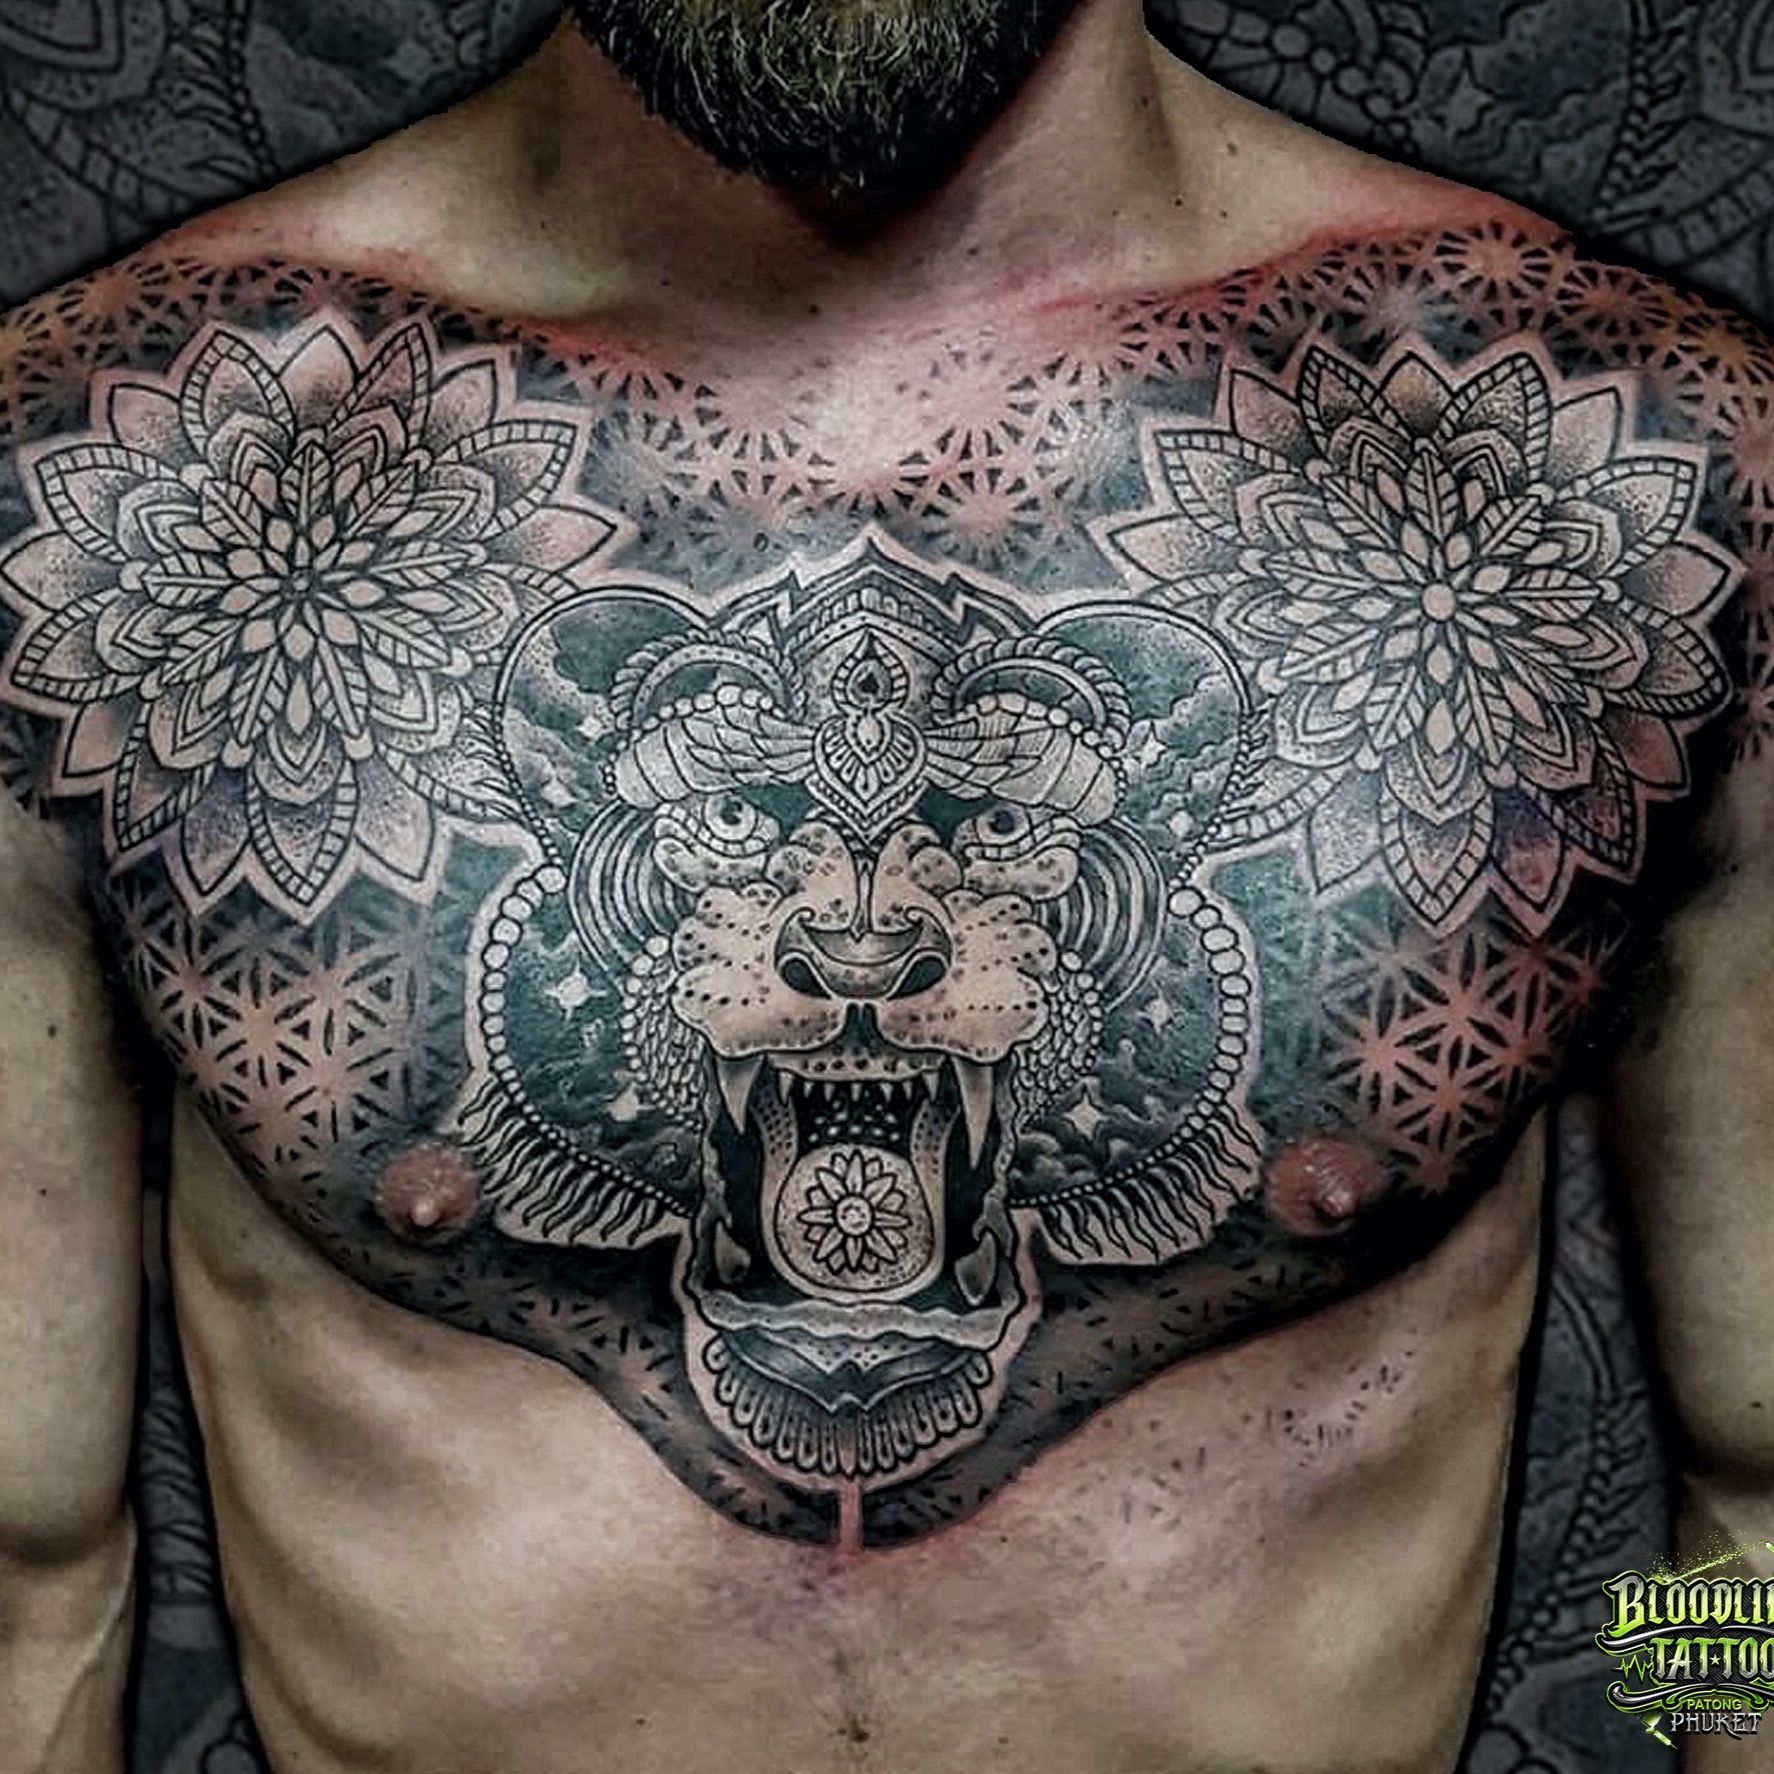 Tattoo uploaded by thomas rousseau  chest chesttattoo tattoochest  geometry geometric geometrictattoo sacredgeometry sacredgeometrytattoo  dotworktattoo dotwork dottattoo blackworktattoo blackwork psychedelic  patternwork patterntattoo 